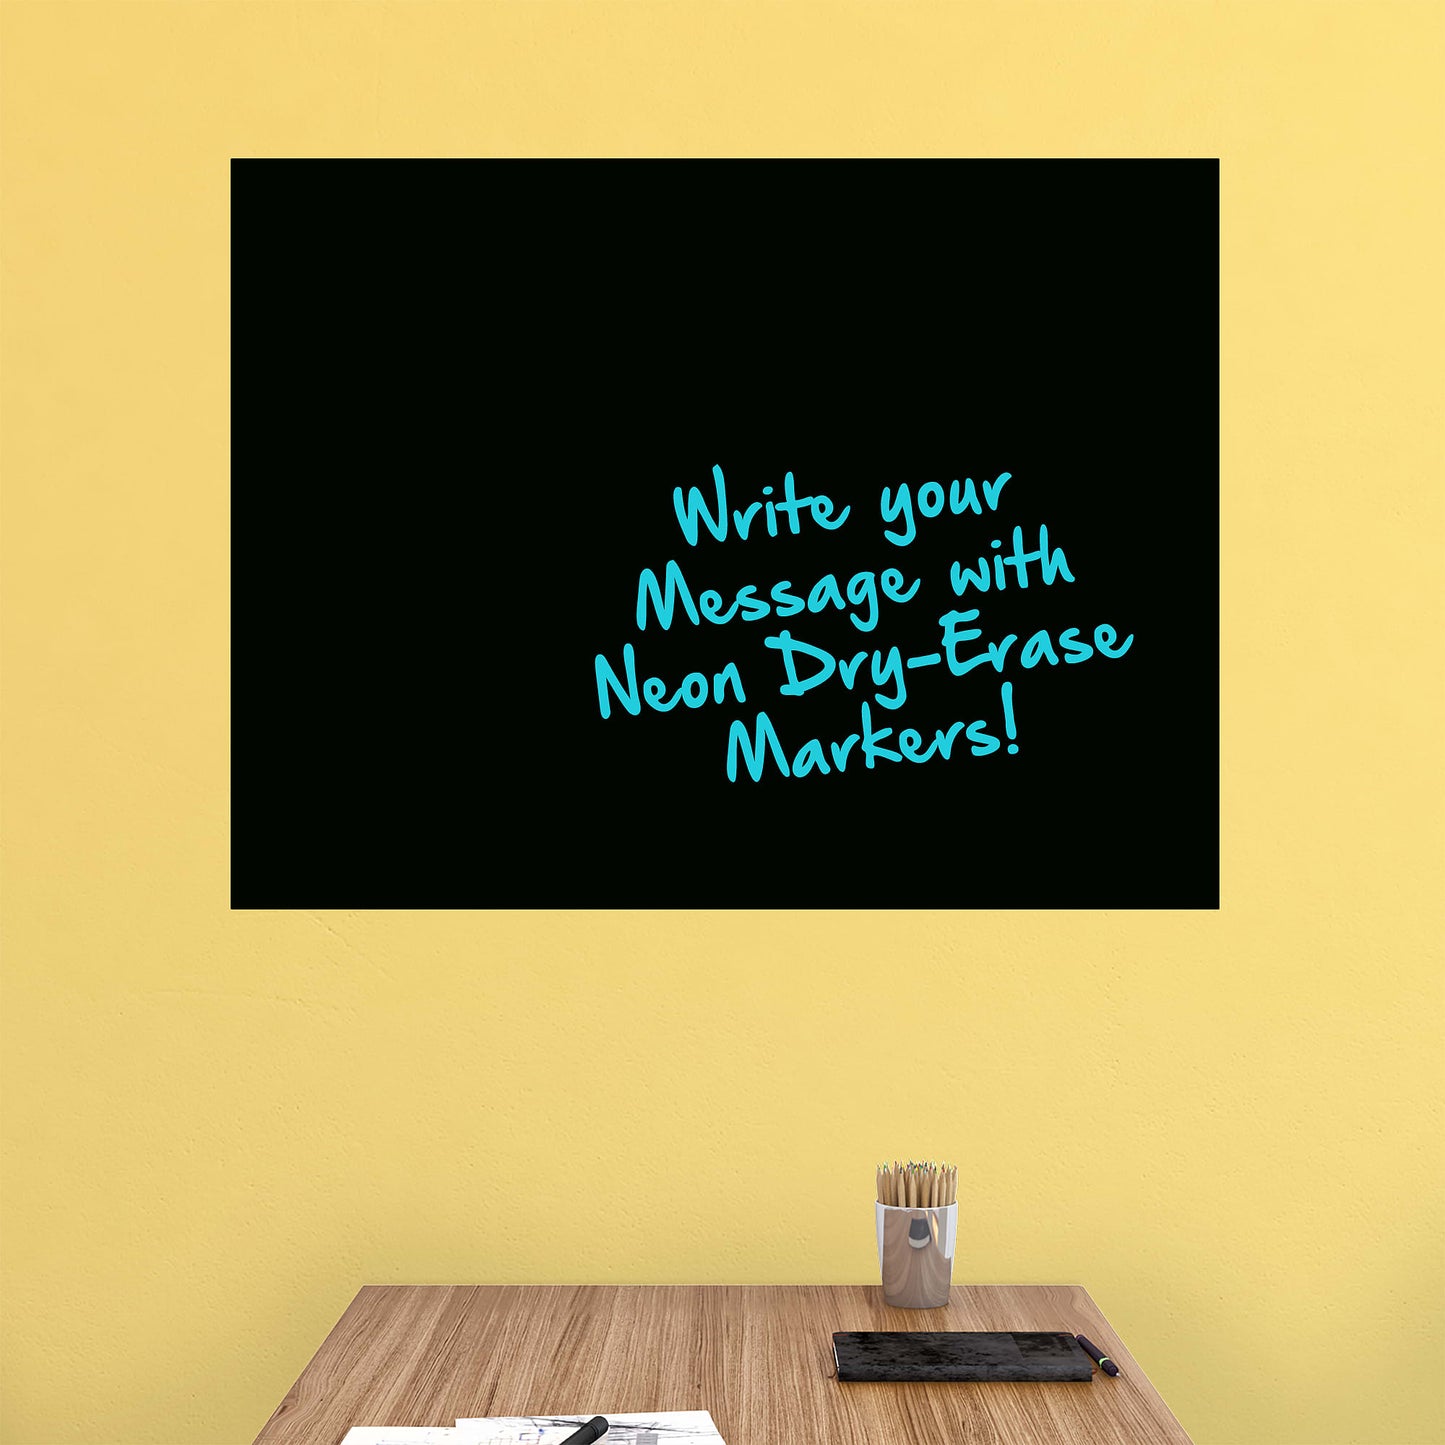 Fathead Dry Erase: Blackboard - Giant Removable Wall Decal